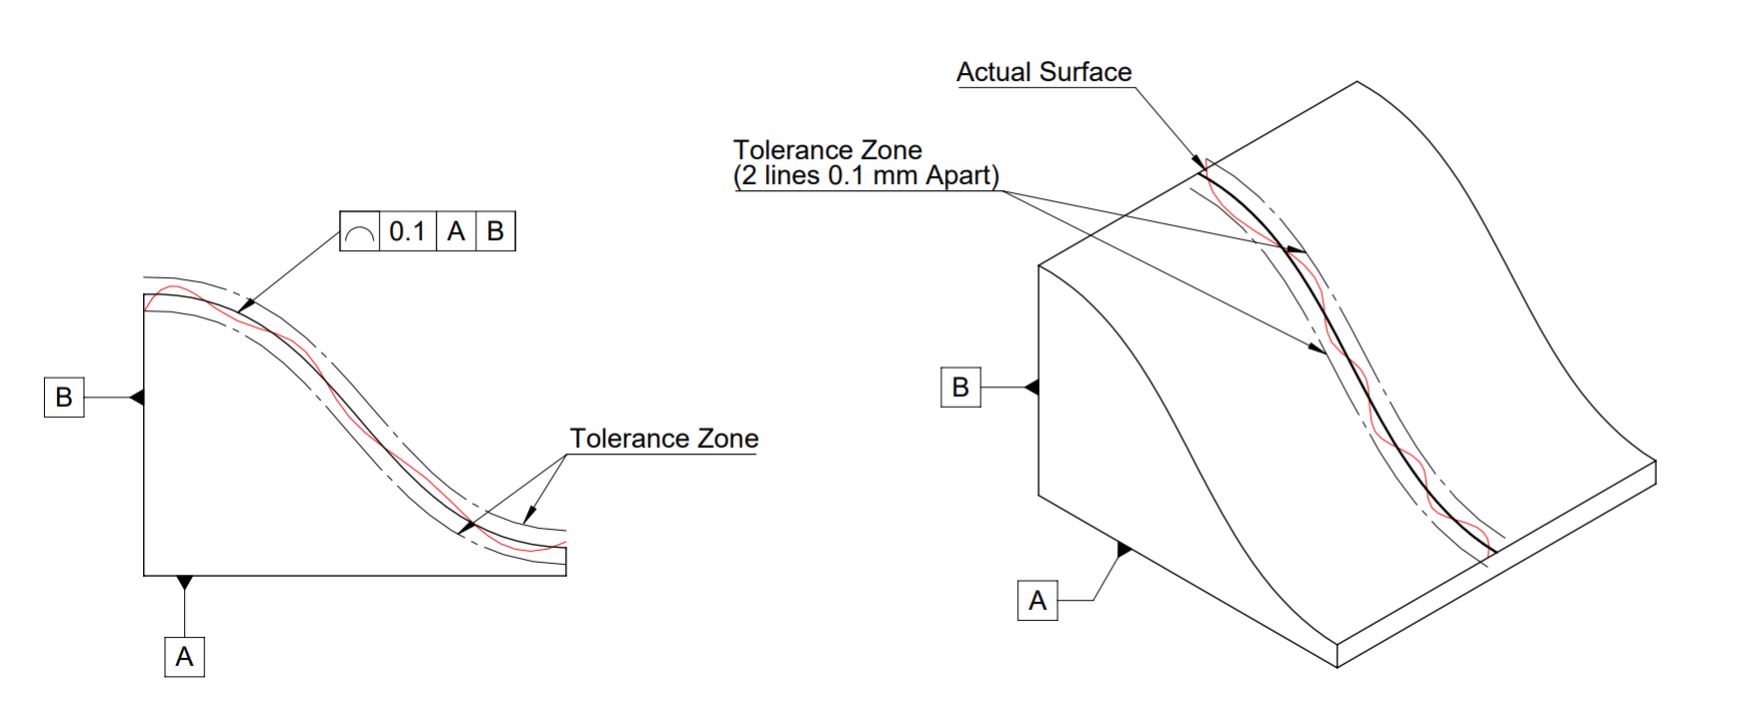 This image shows gd&t profile of a line control tolerance zone.